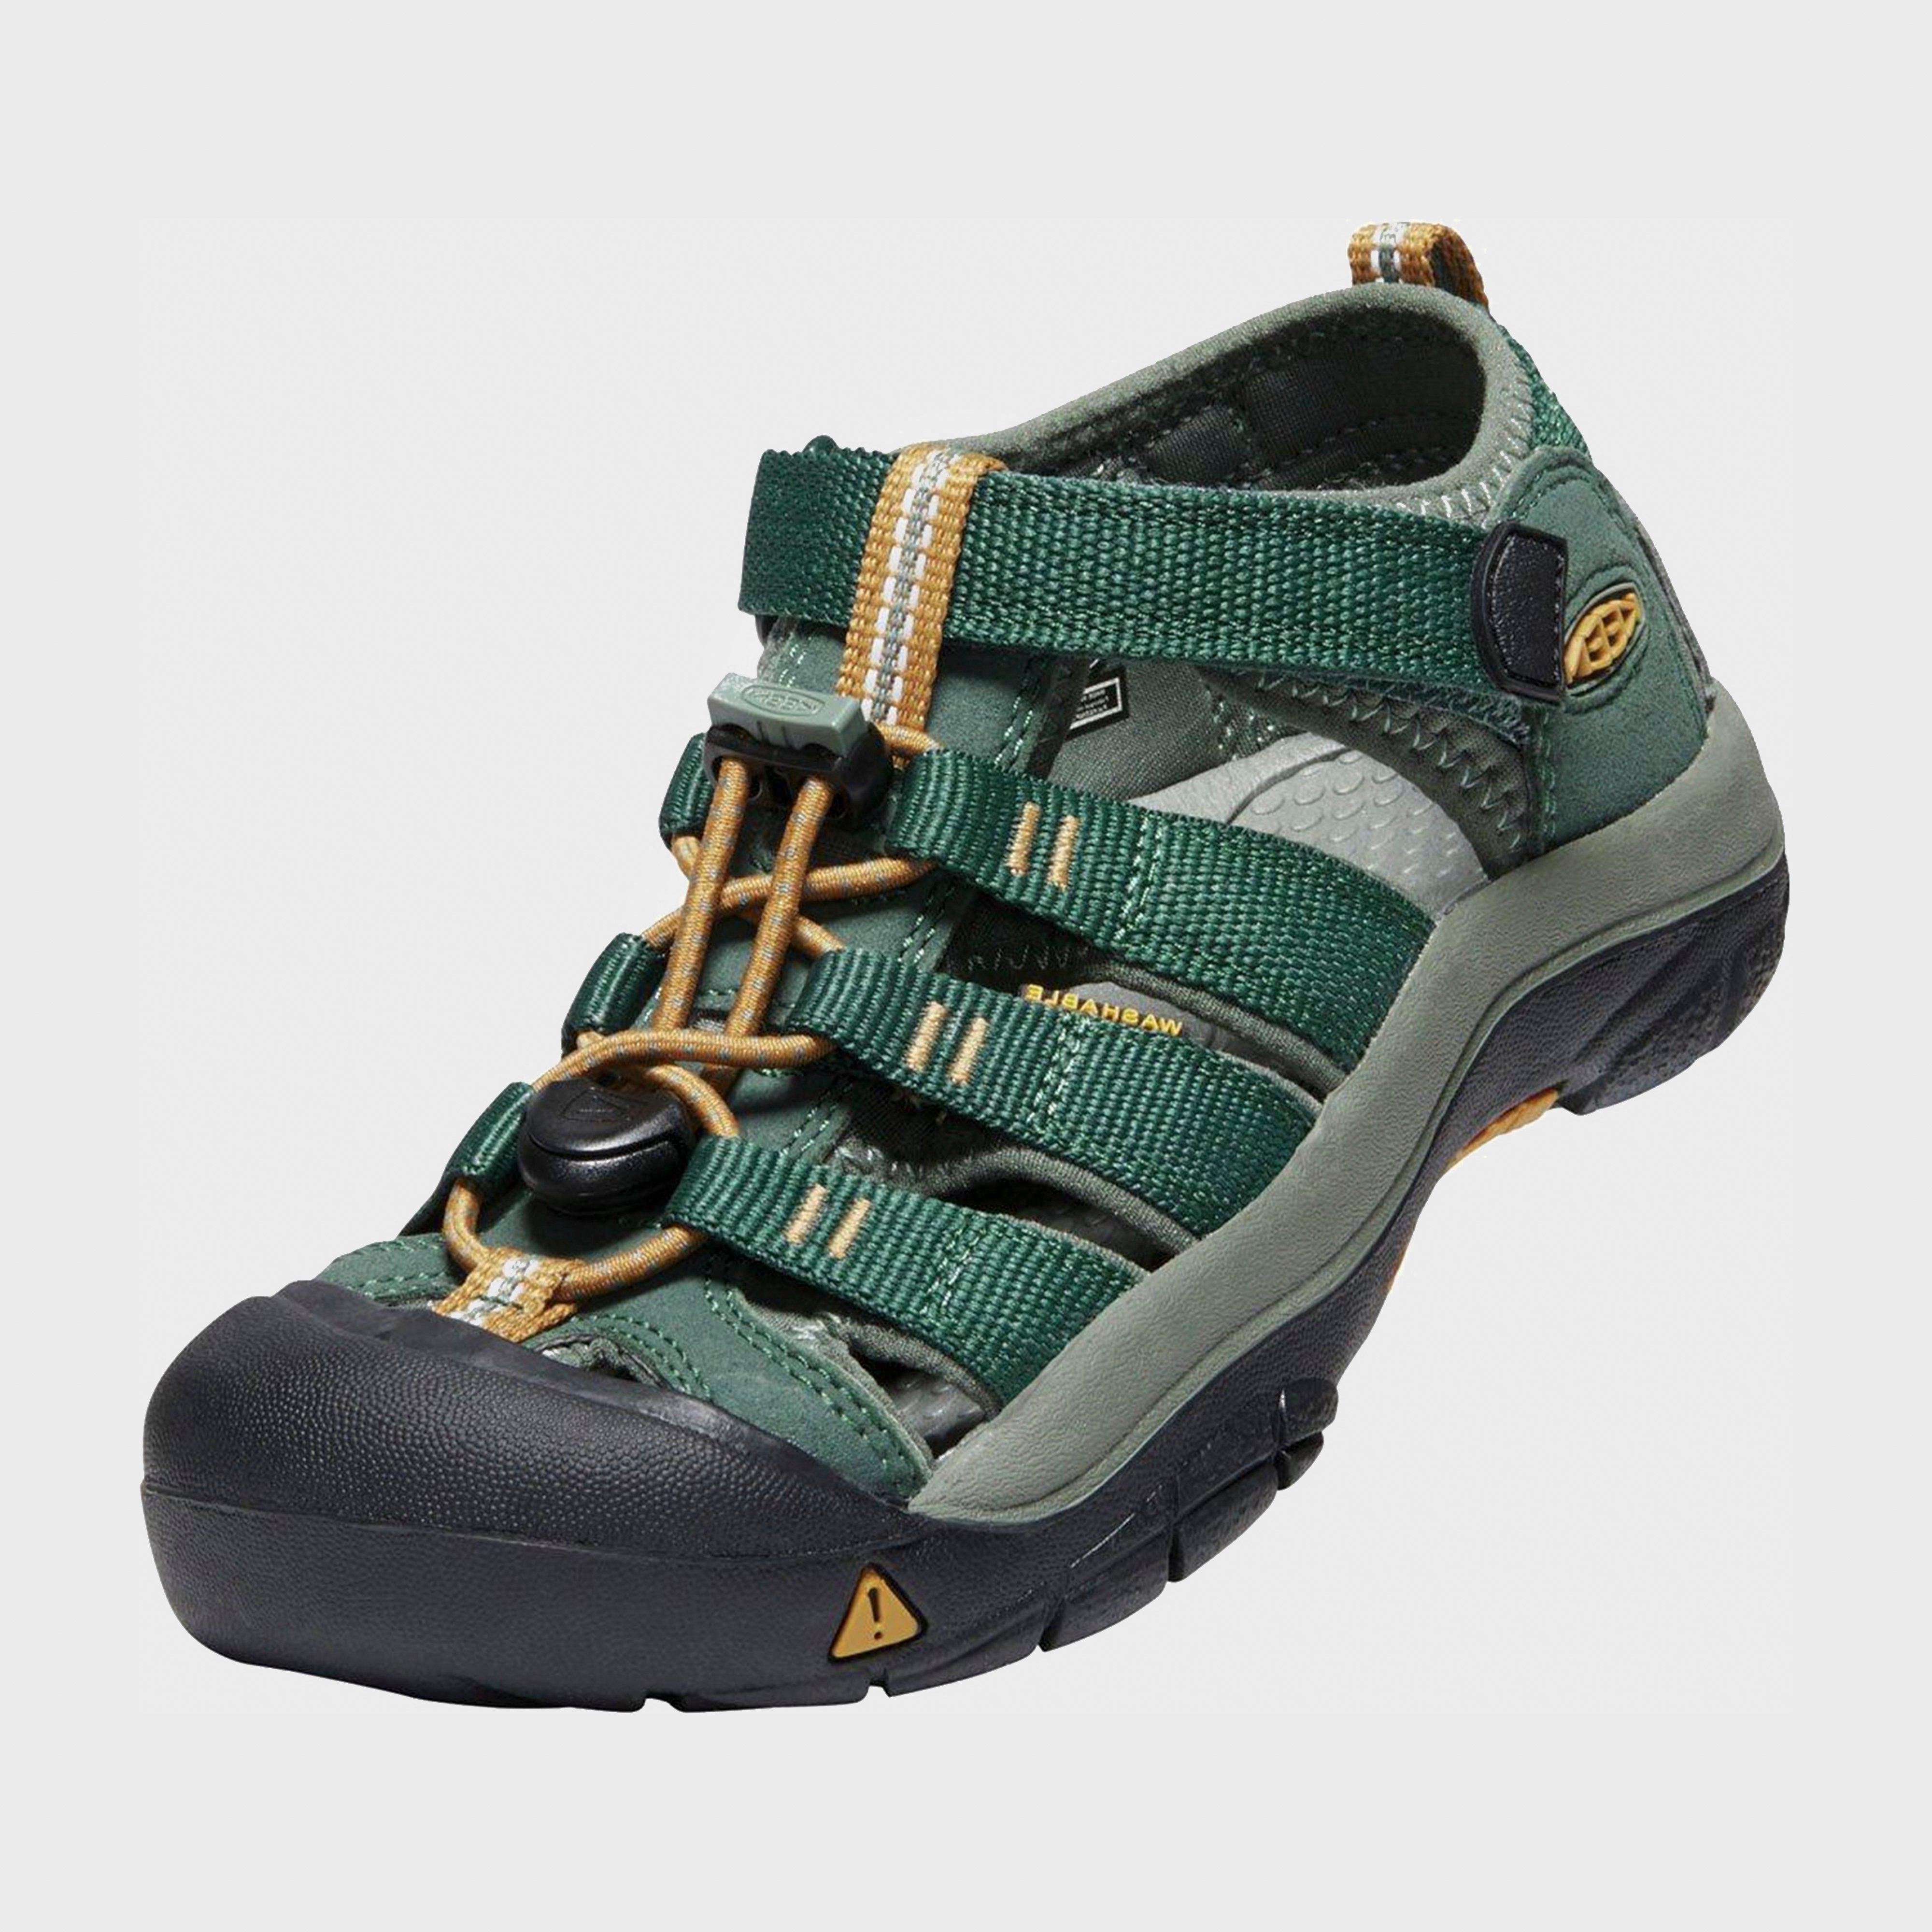 childrens walking boots go outdoors